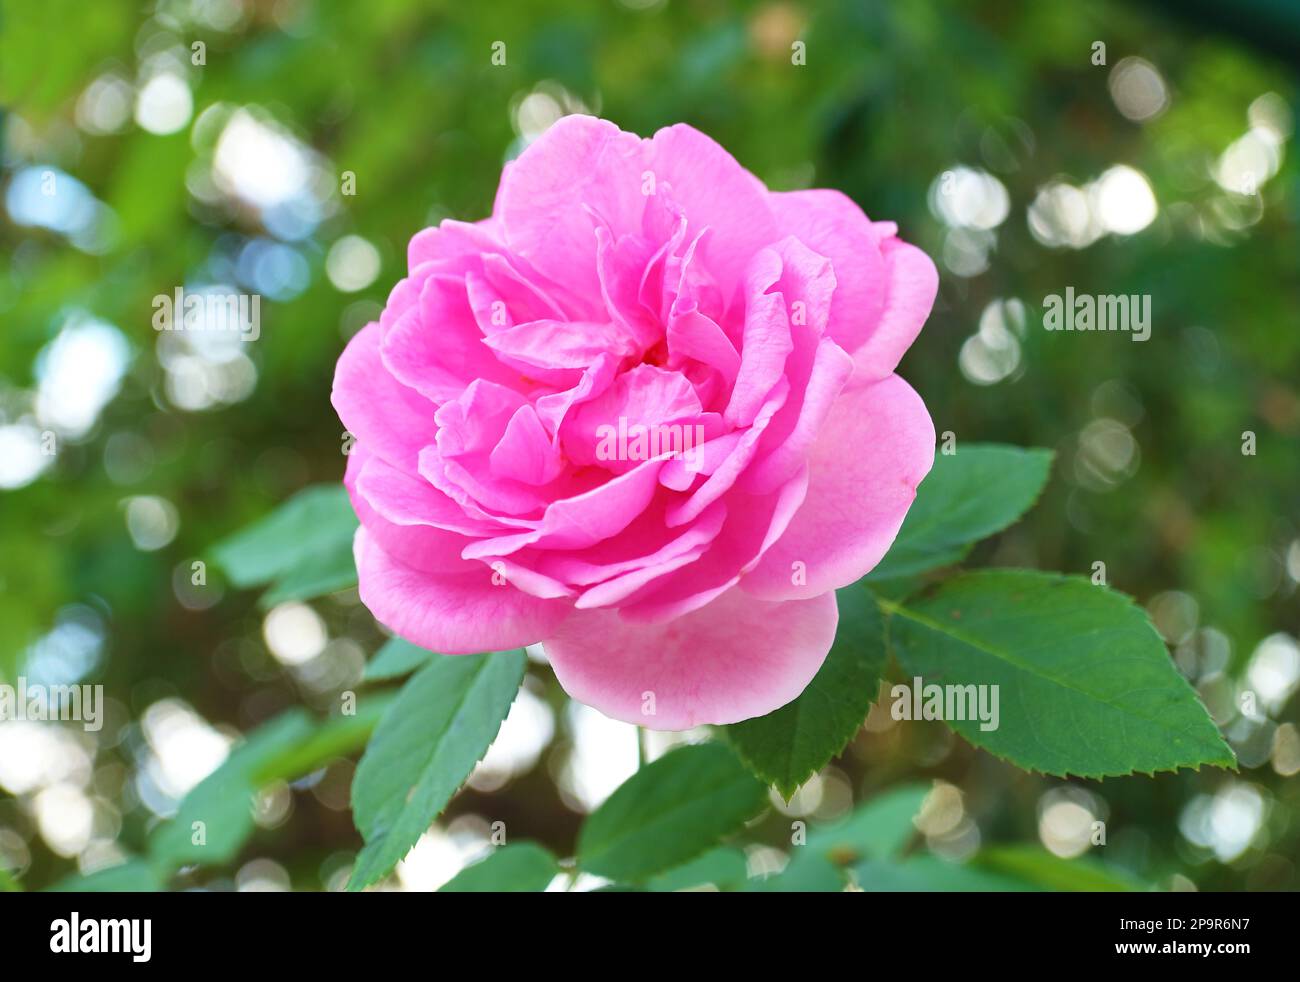 Closeup of a Gorgeous Pink Carefree Wonder Rose Blossoming in the Garden Stock Photo